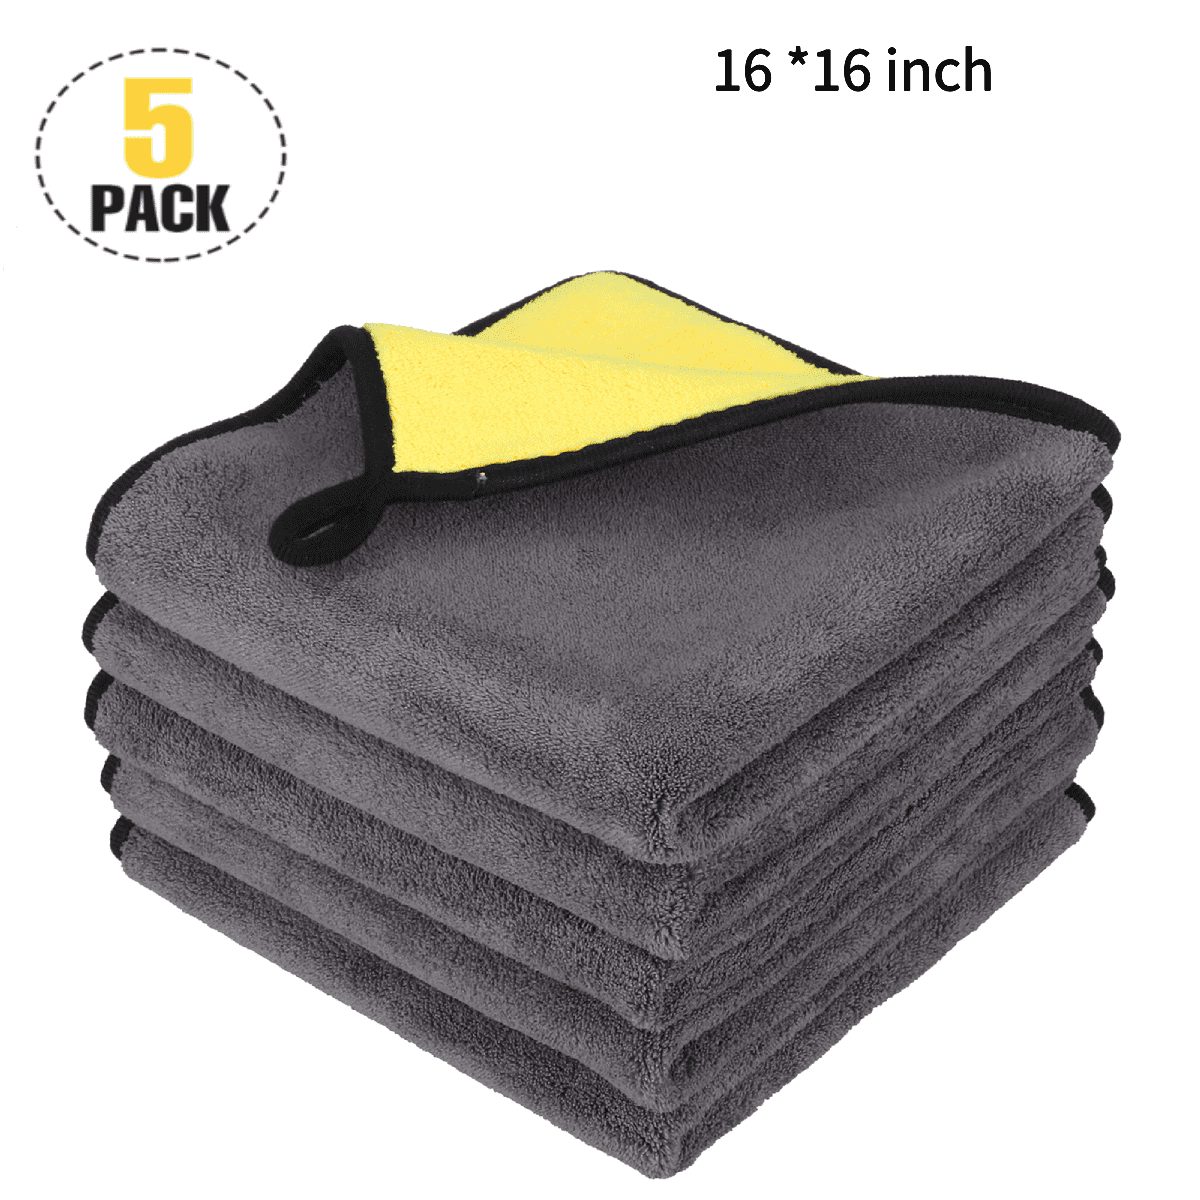 Microfiber Car Cleaning Cloths Kitchen Dish Car Wash Towel Absorbent Rags 16x16 